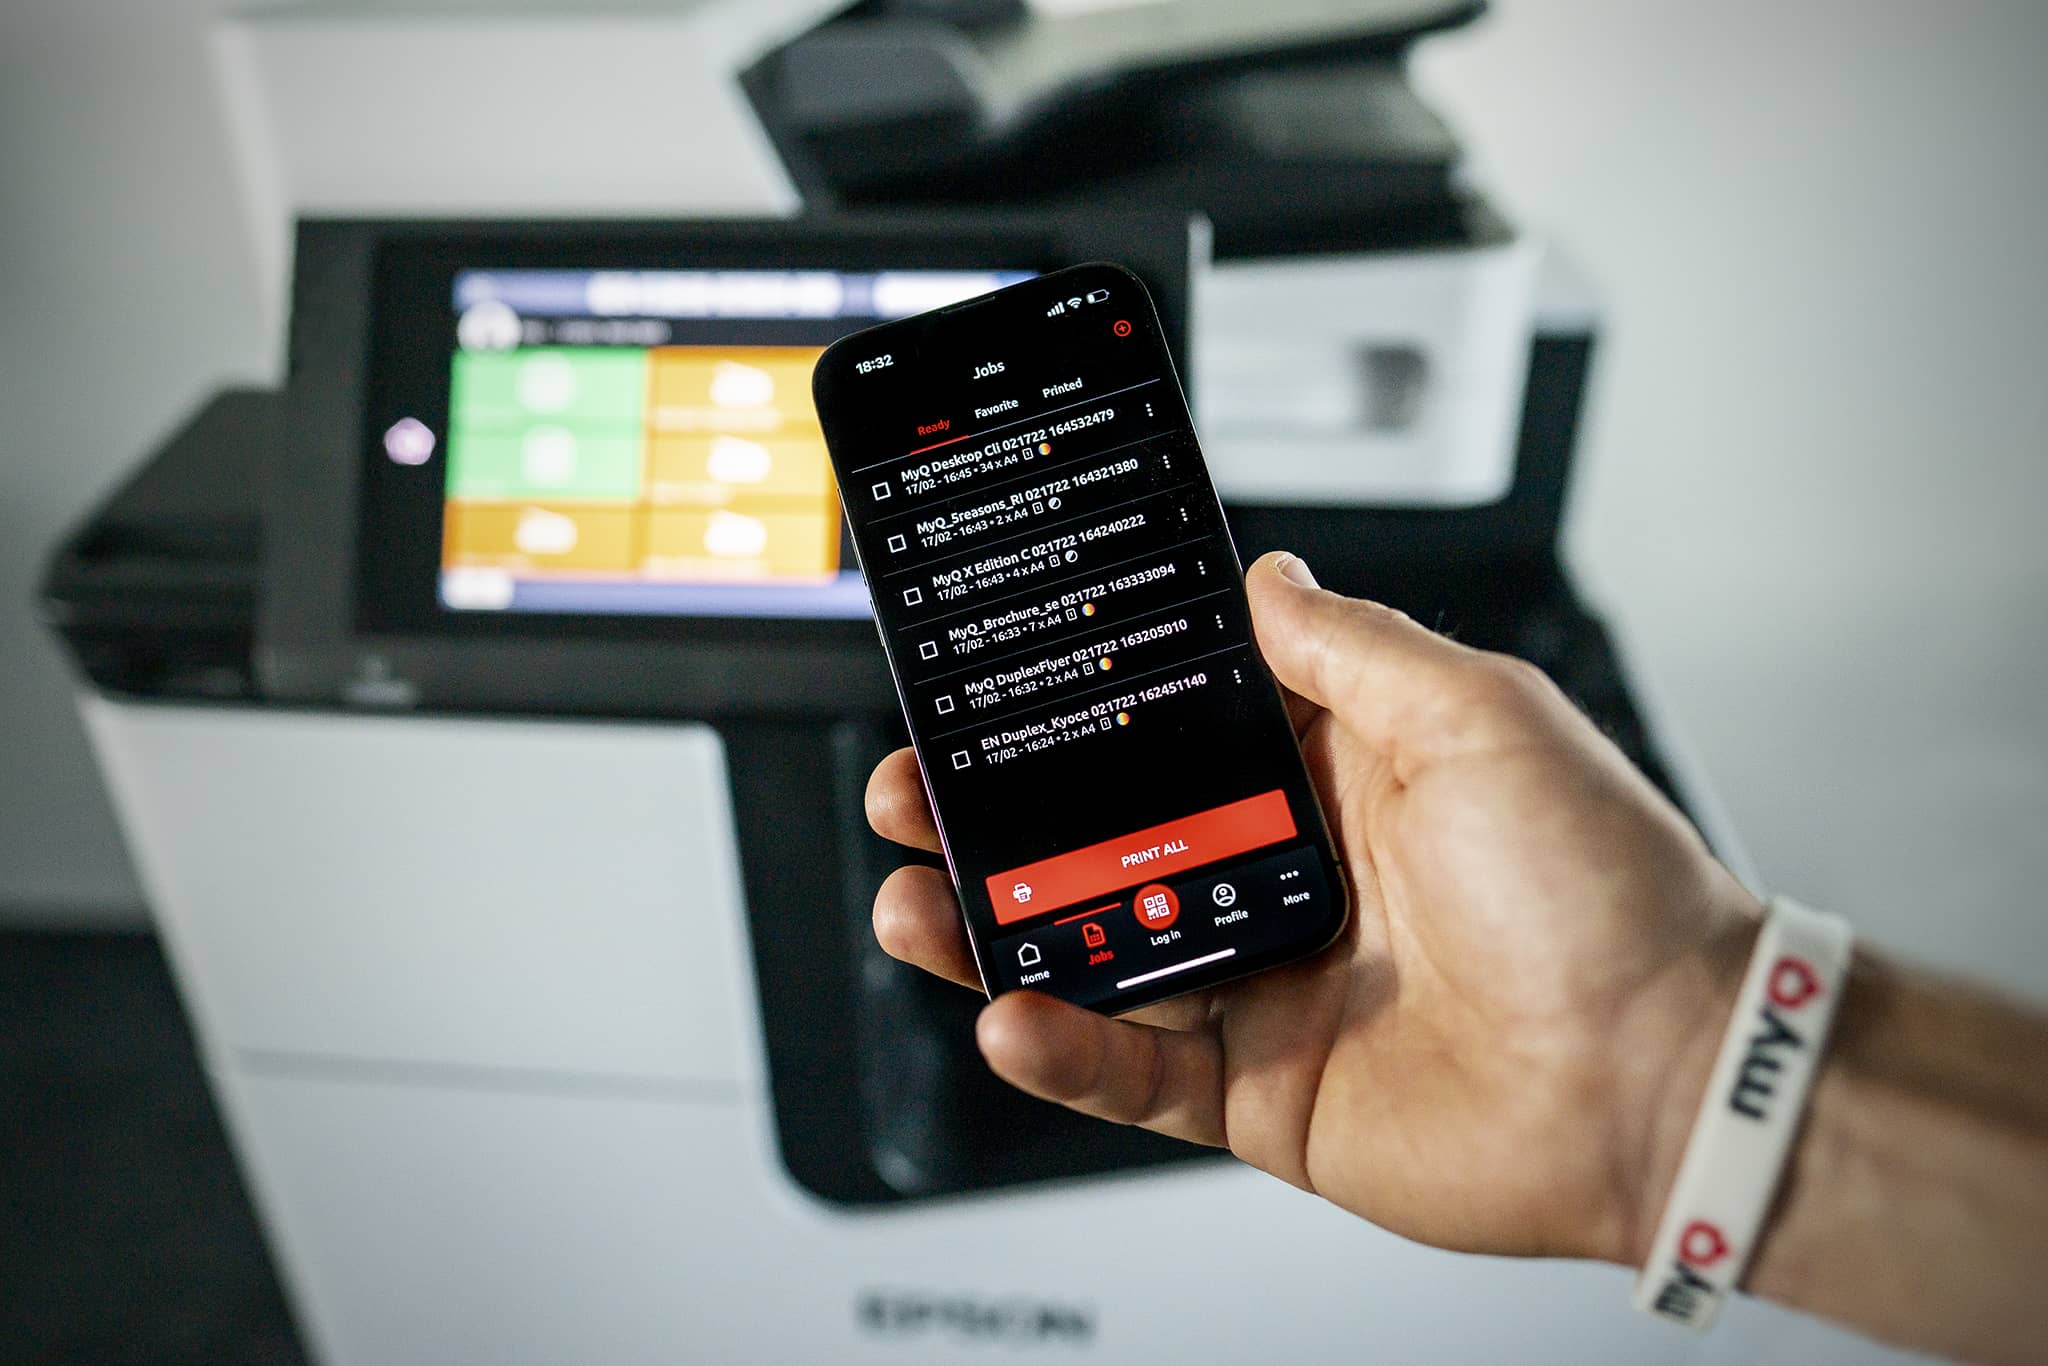 Users can manage their print jobs with their mobile phone or tablet with the MyQ X Mobile Client application (iOS and Android).